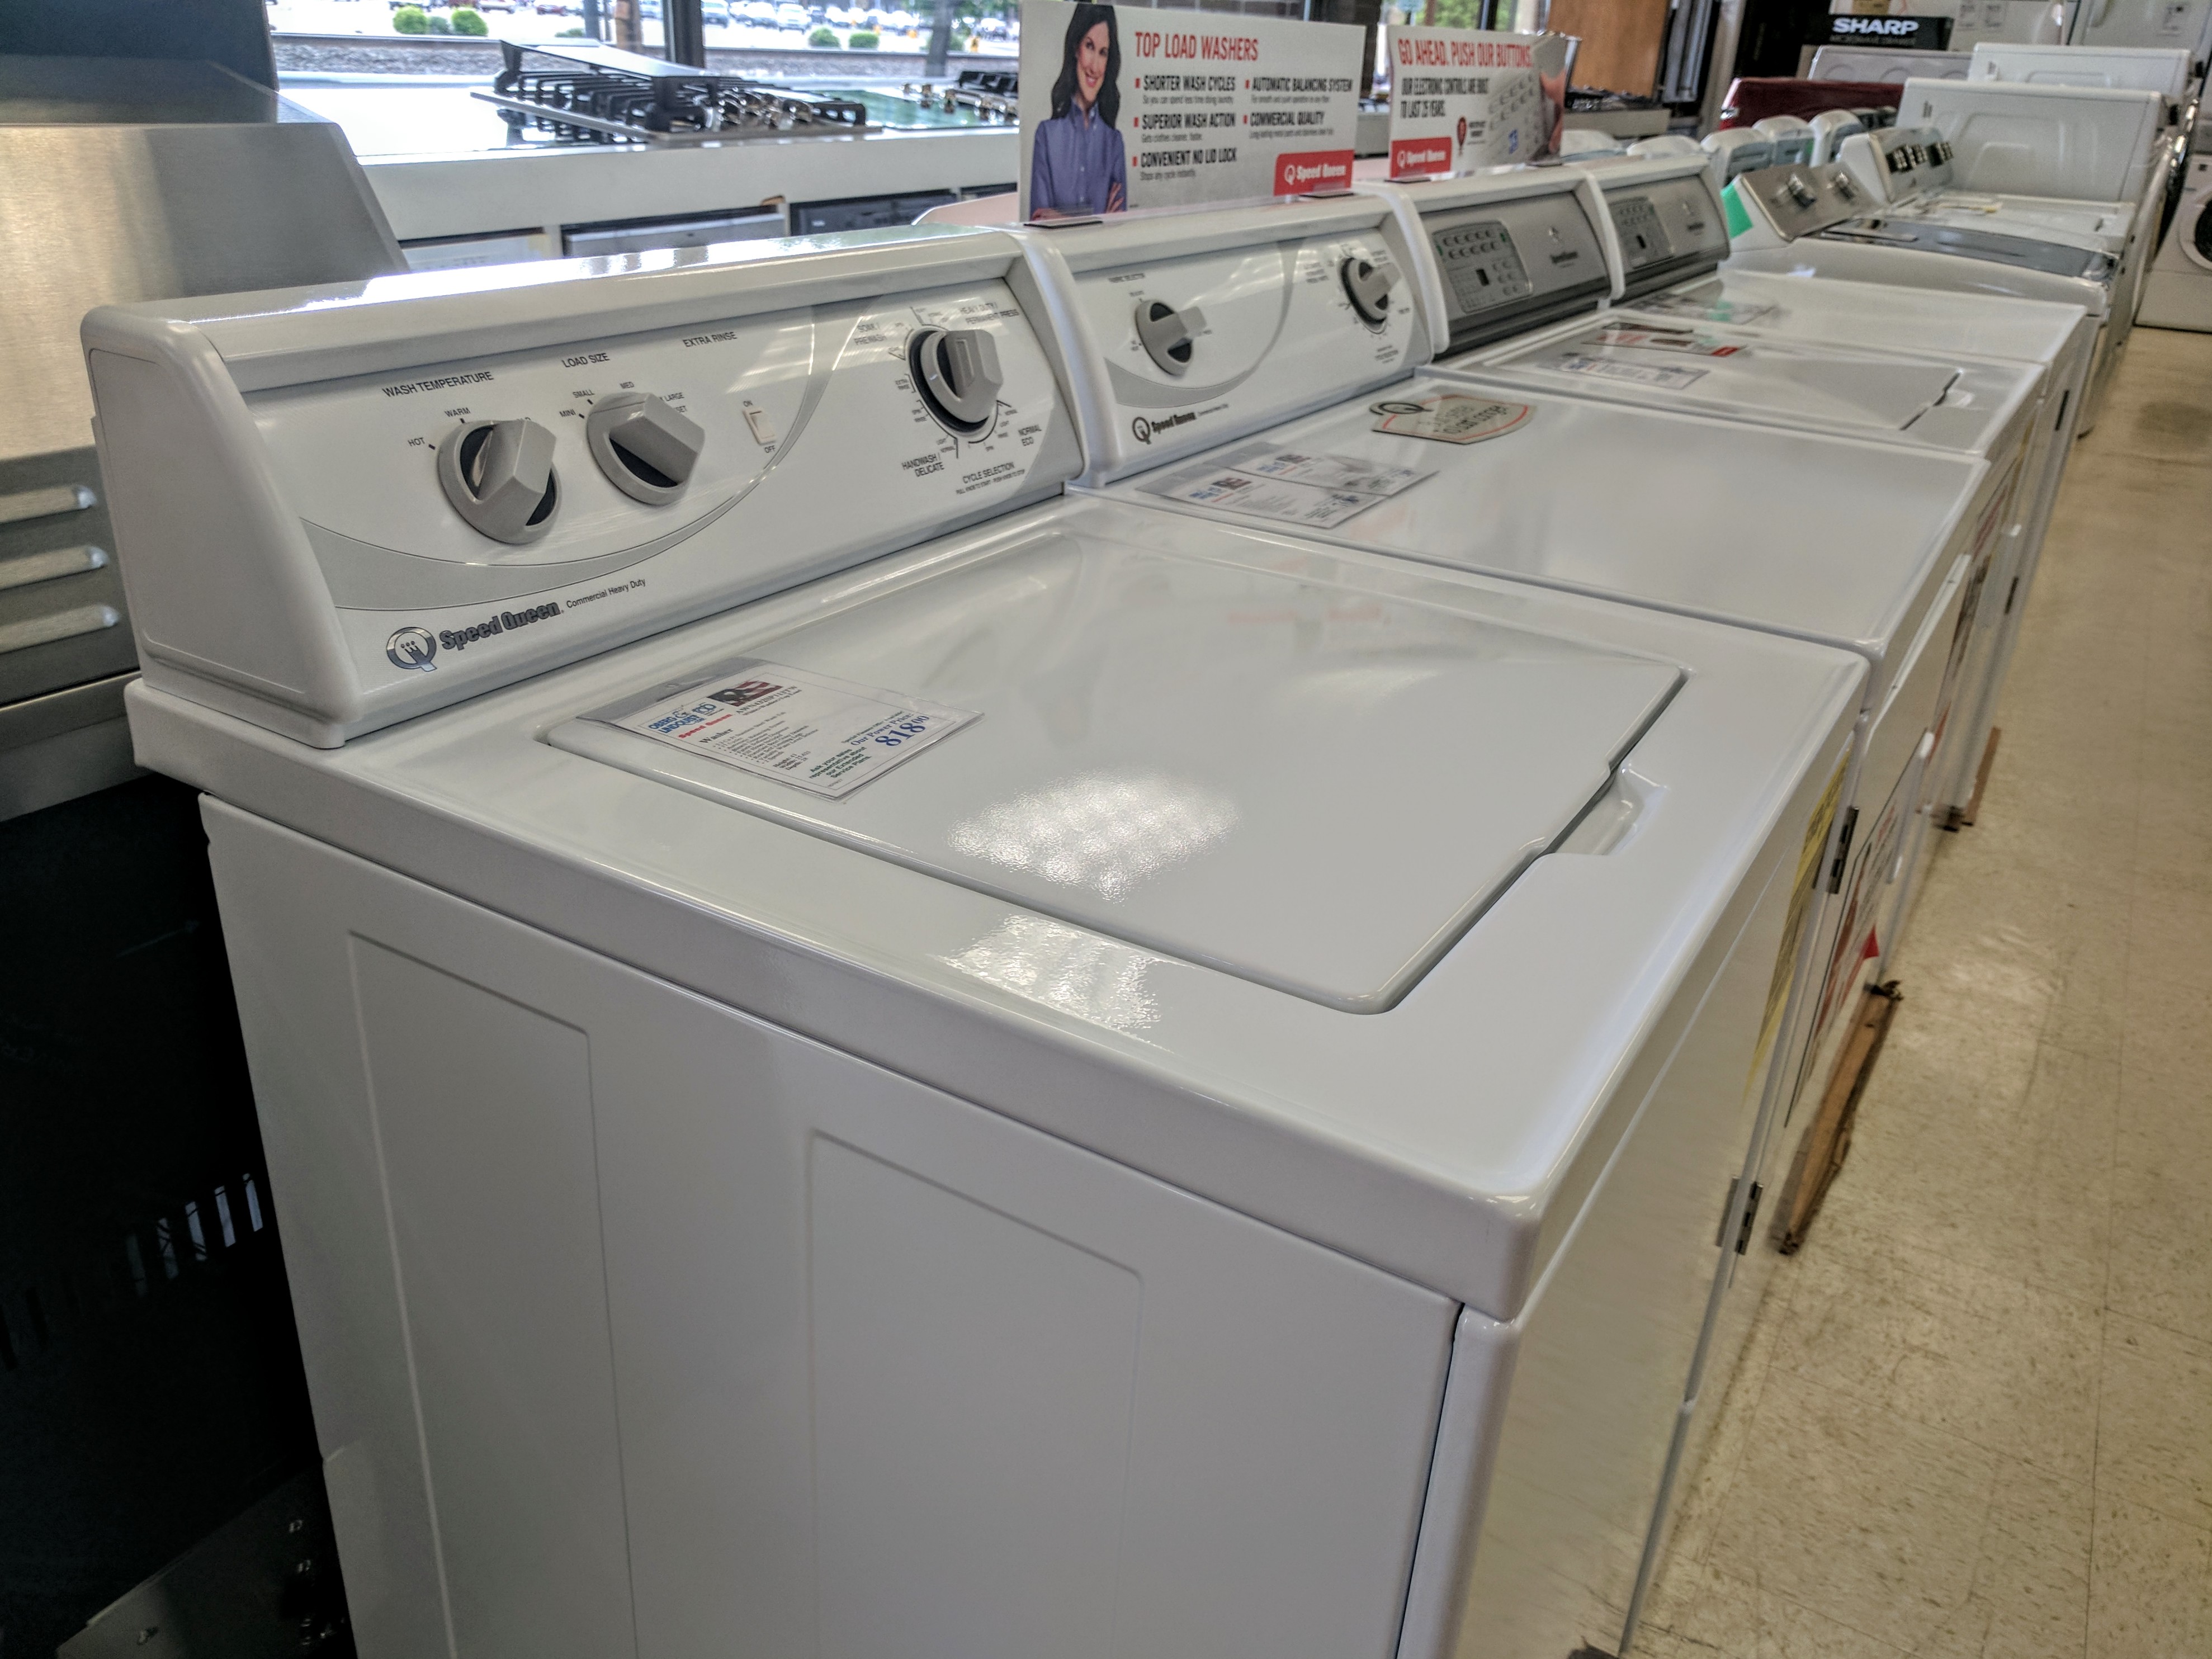 Dryer Repair Services in New York